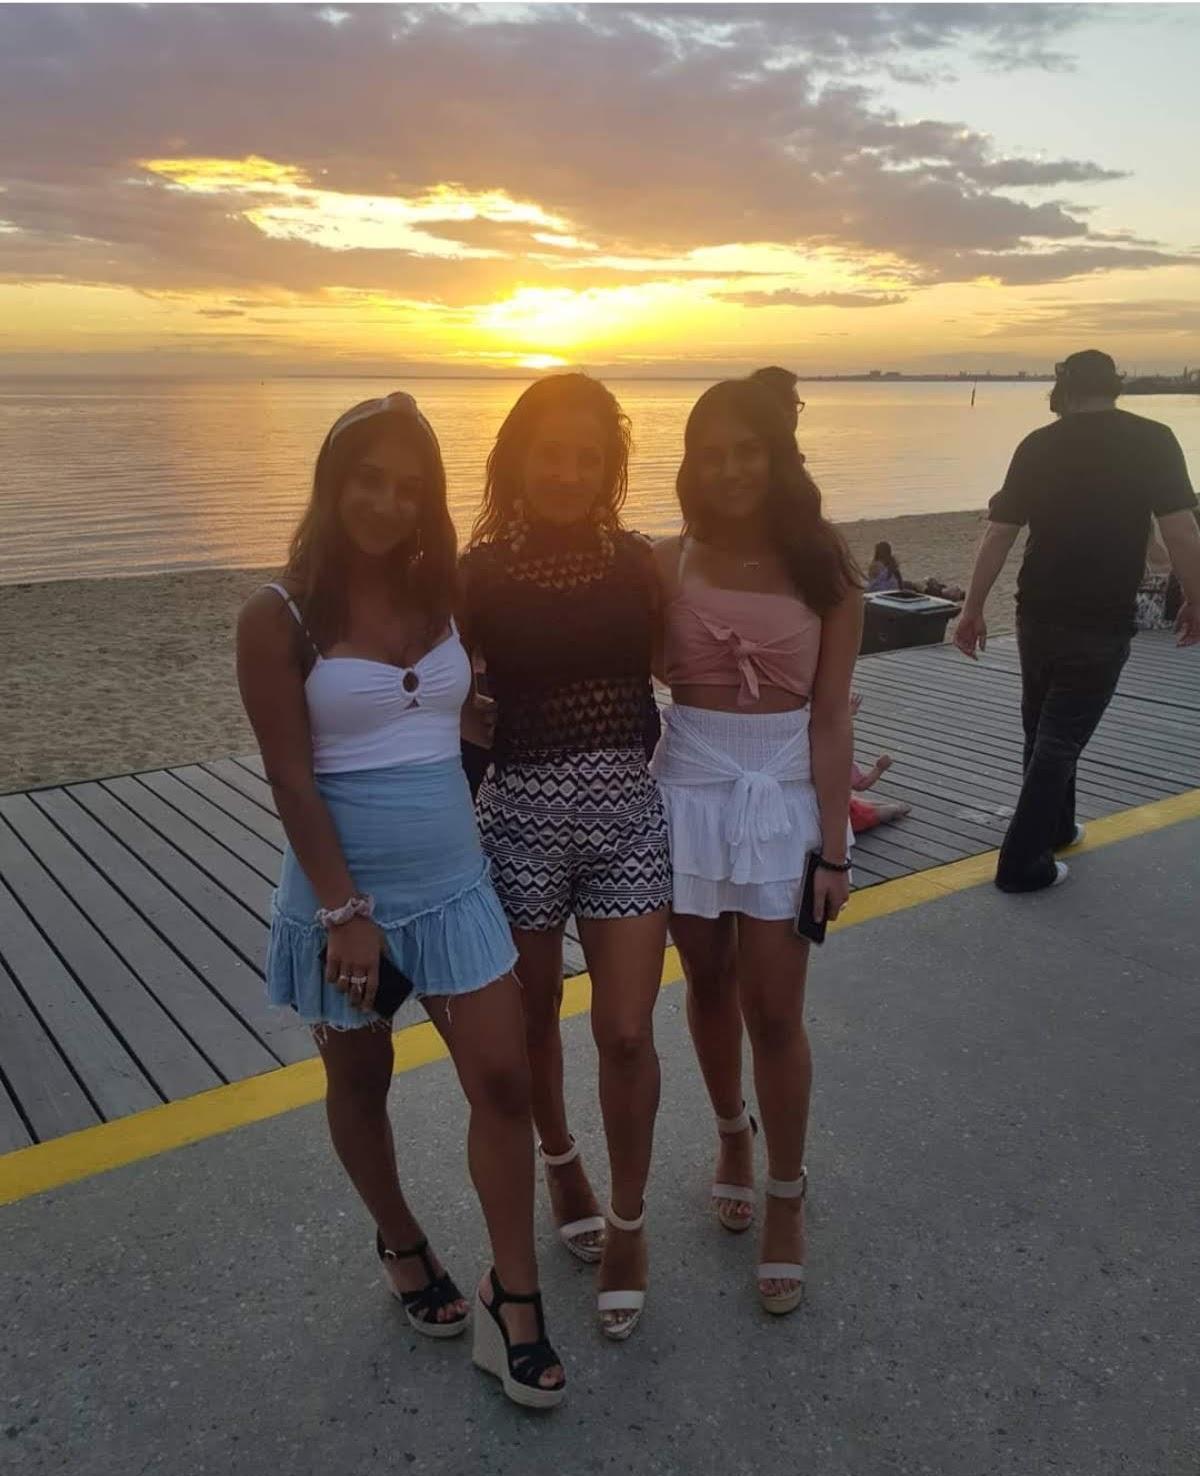 Sunset with the girls